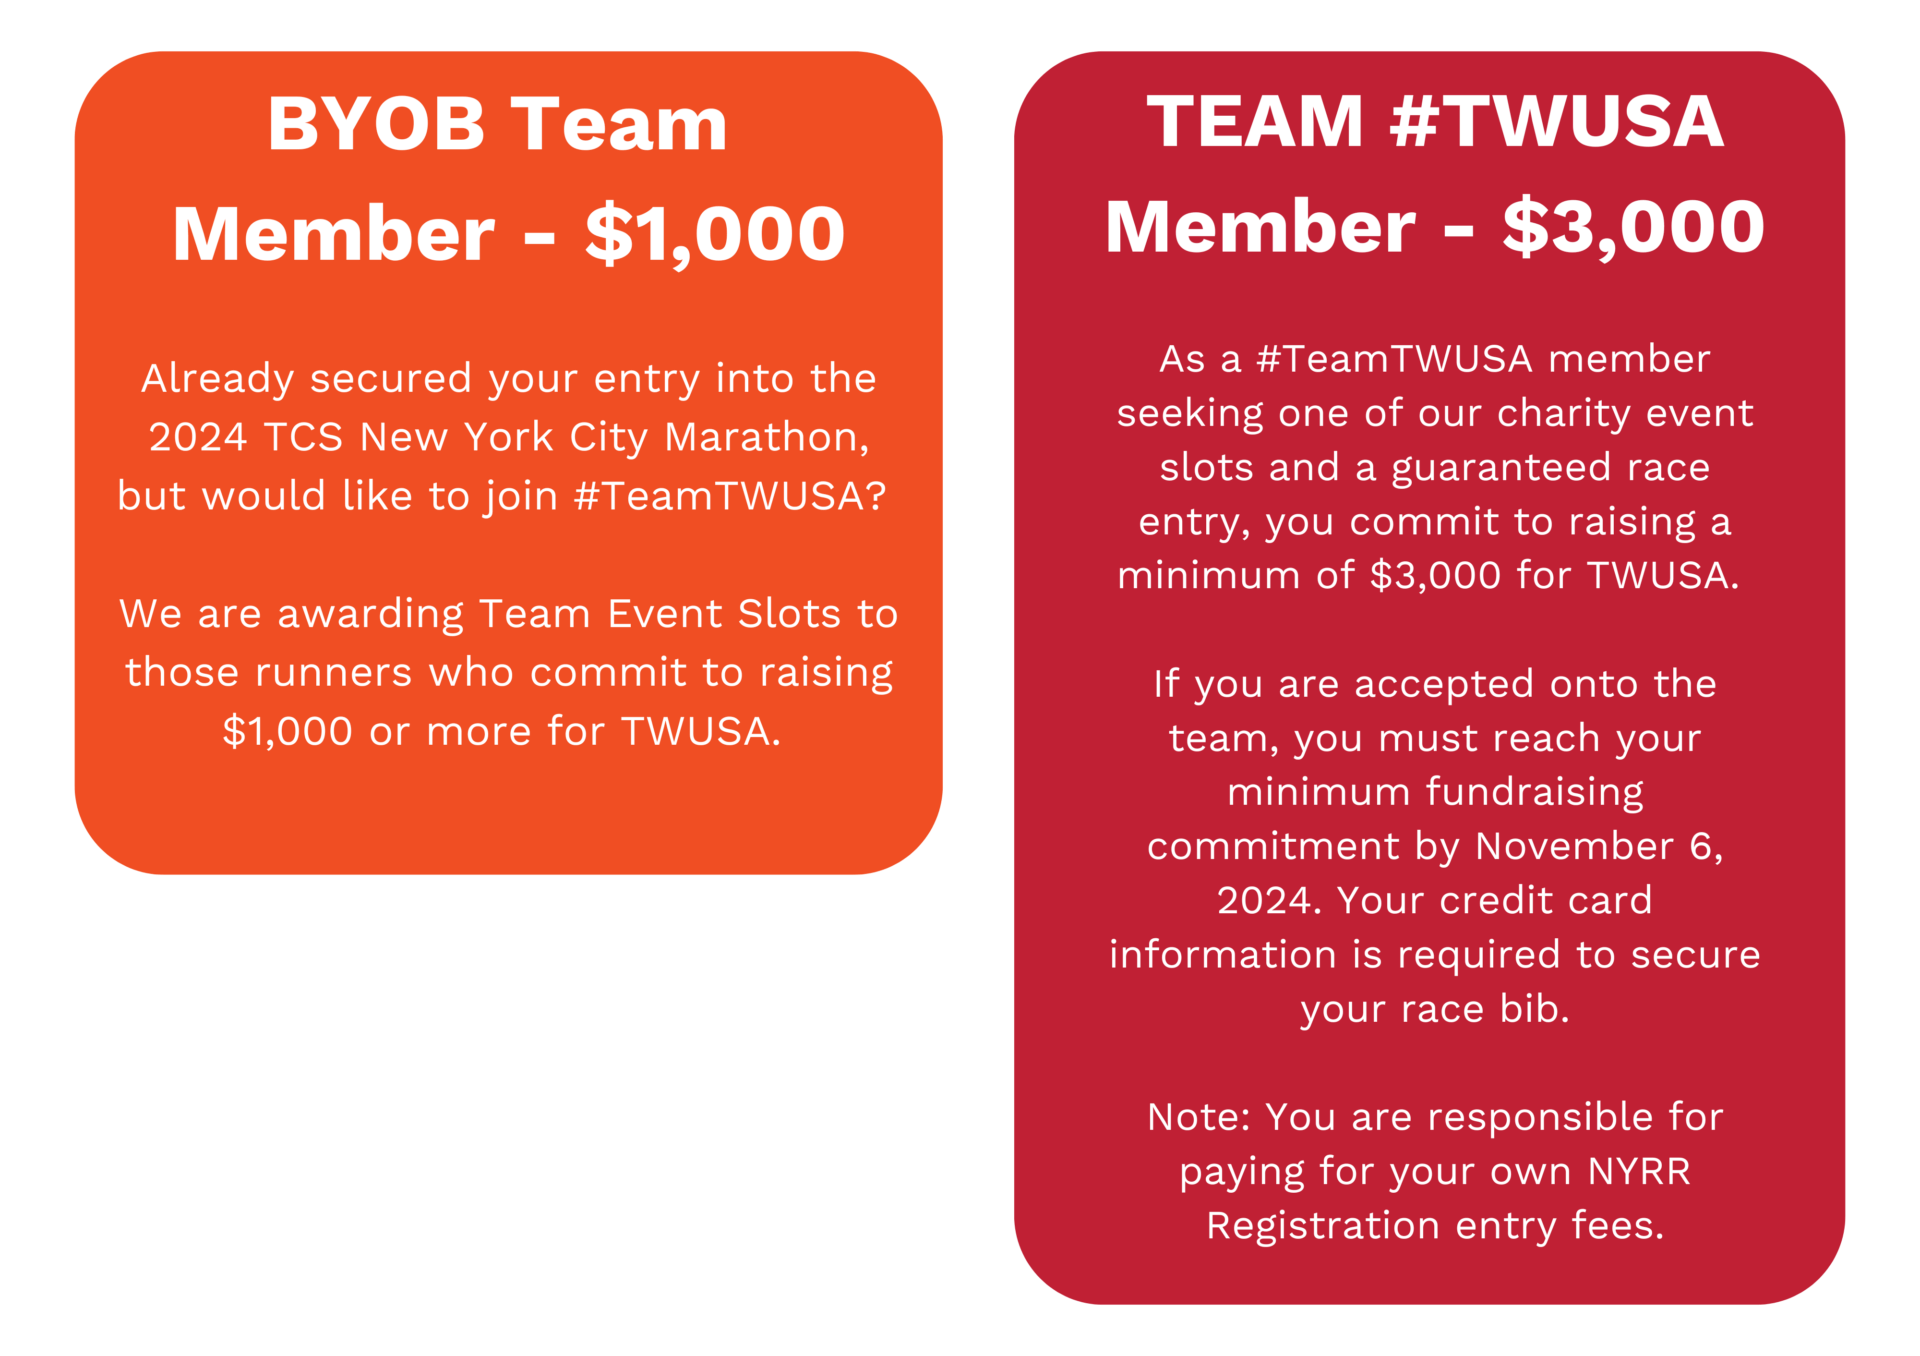 BYOB Team Member - $1,000 Already secured your entry into the 2024 TCS New York City Marathon, but would like to join #TeamTWUSA? We are awarding Team Event Slots to those runners who commit to raising $1,000 or more for TWUSA. -- TEAM #TWUSA Member - $3,000 As a #TeamTWUSA member seeking one of our charity event slots and a guaranteed race entry, you commit to raising a minimum of $3,000 for TWUSA. If you are accepted onto the team, you must reach your minimum fundraising commitment by November 6, 2024. Your credit card information is required to secure your race bib. Note: You are responsible for paying for your own NYRR Registration entry fees.